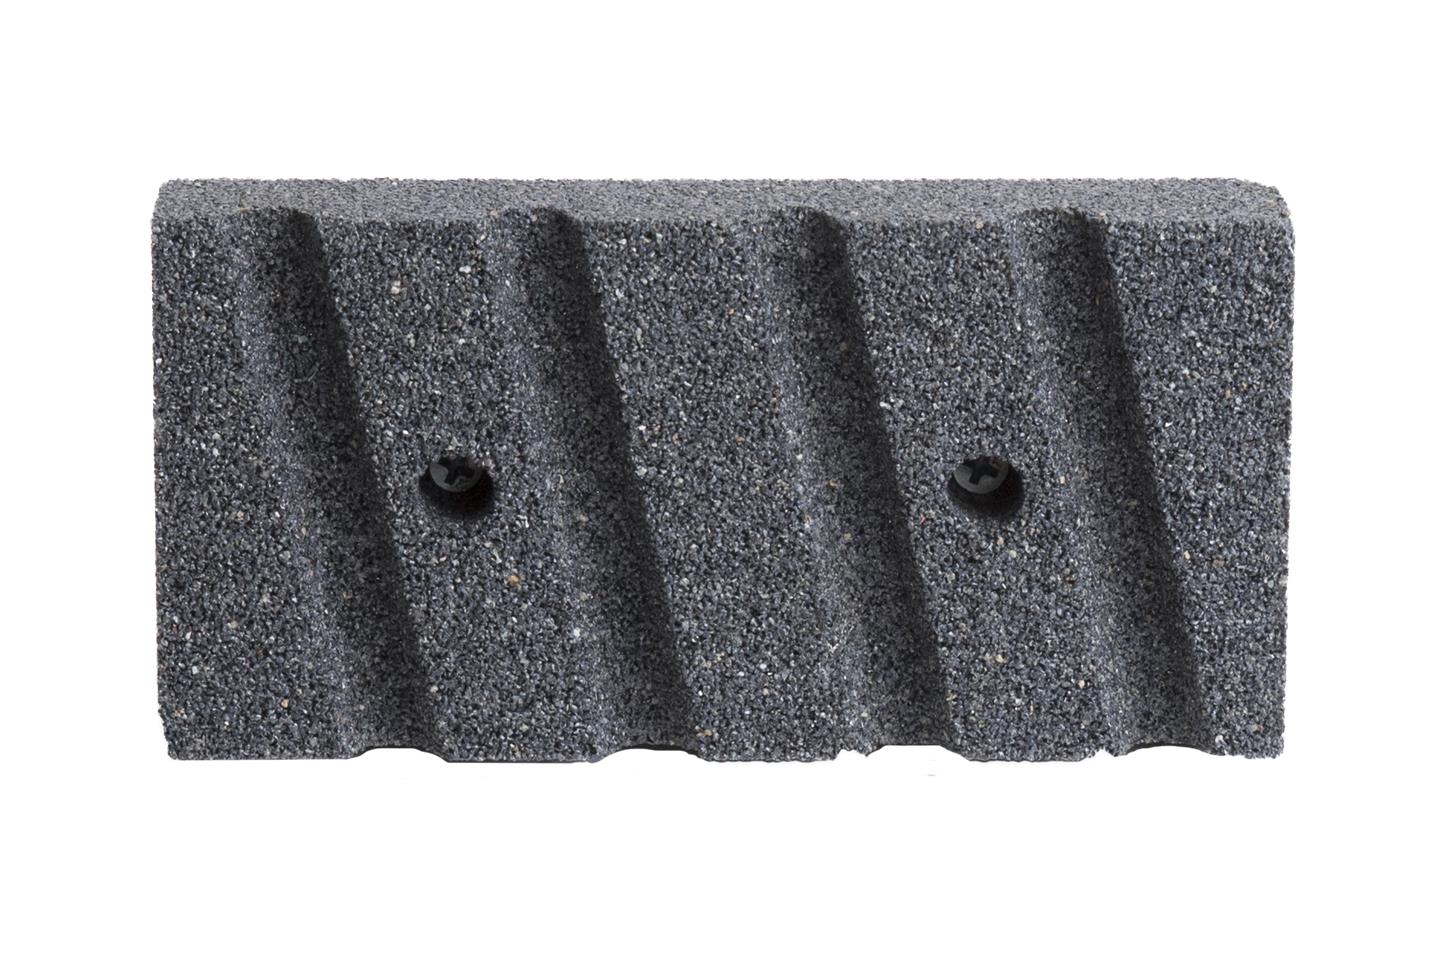 Marshalltown RB192 Rub Brick, 6 in L Blade, 3 in W Blade, 31/32 in Thick Blade, 20 Grit, Silicon Carbide Abrasive - 4